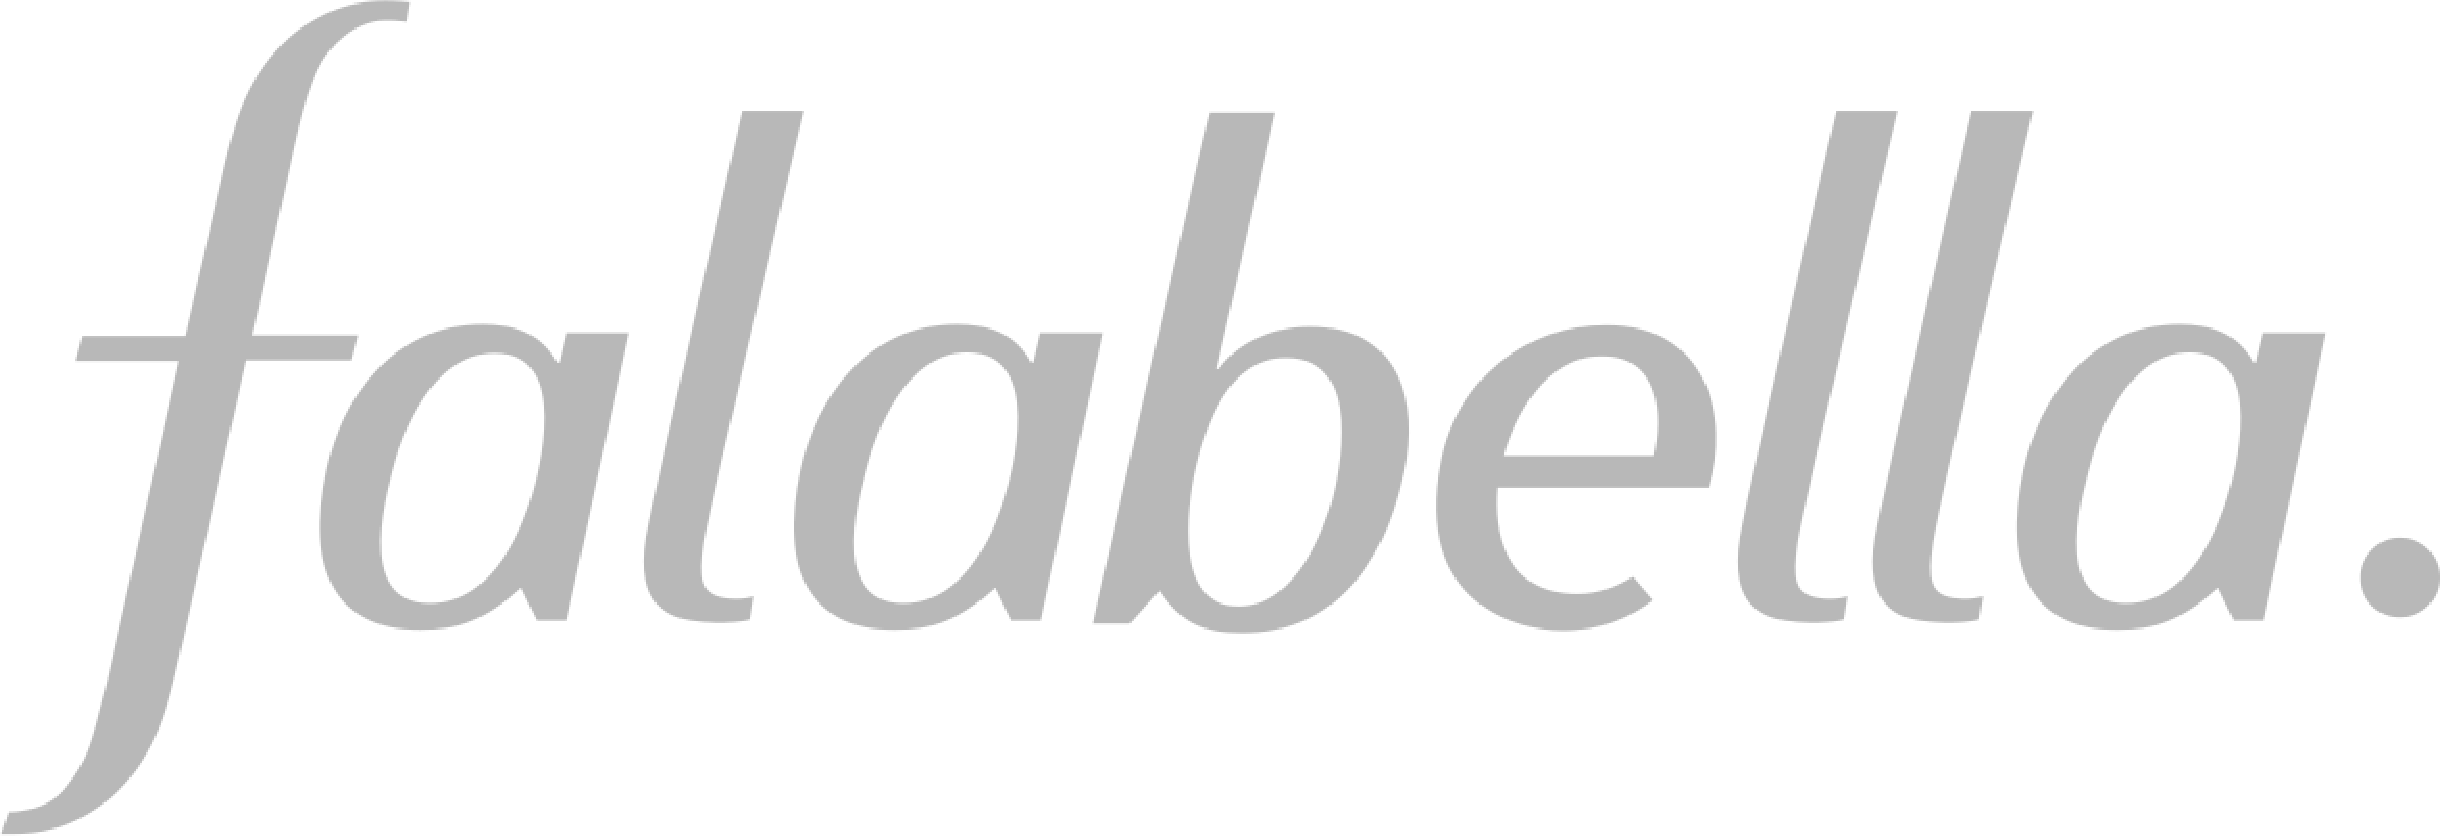 falabell